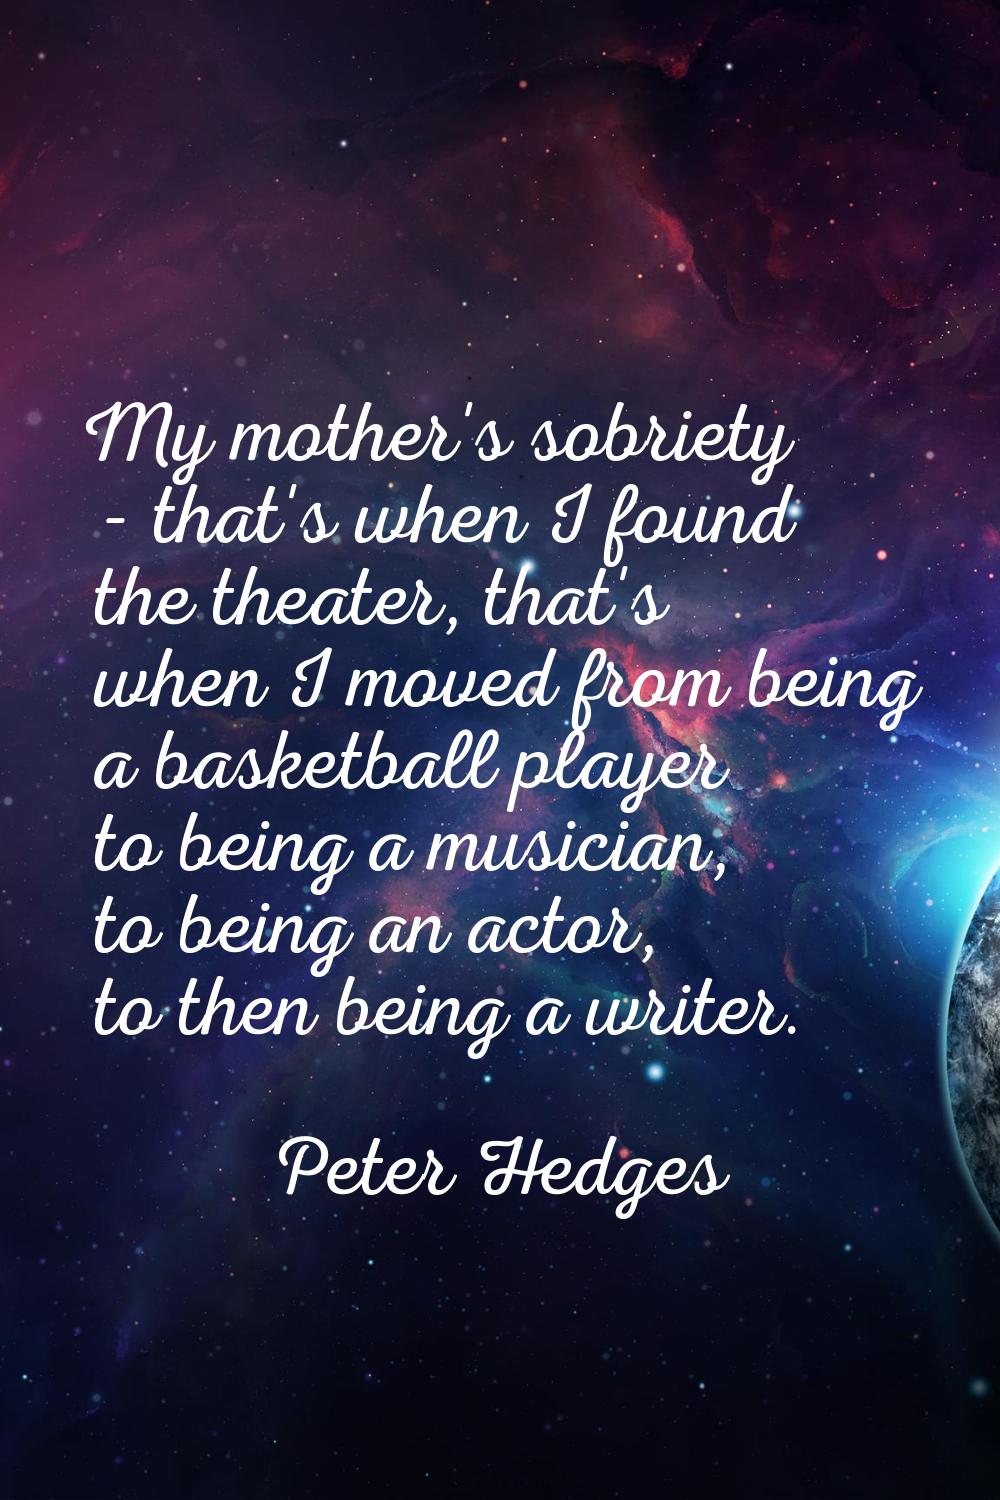 My mother's sobriety - that's when I found the theater, that's when I moved from being a basketball